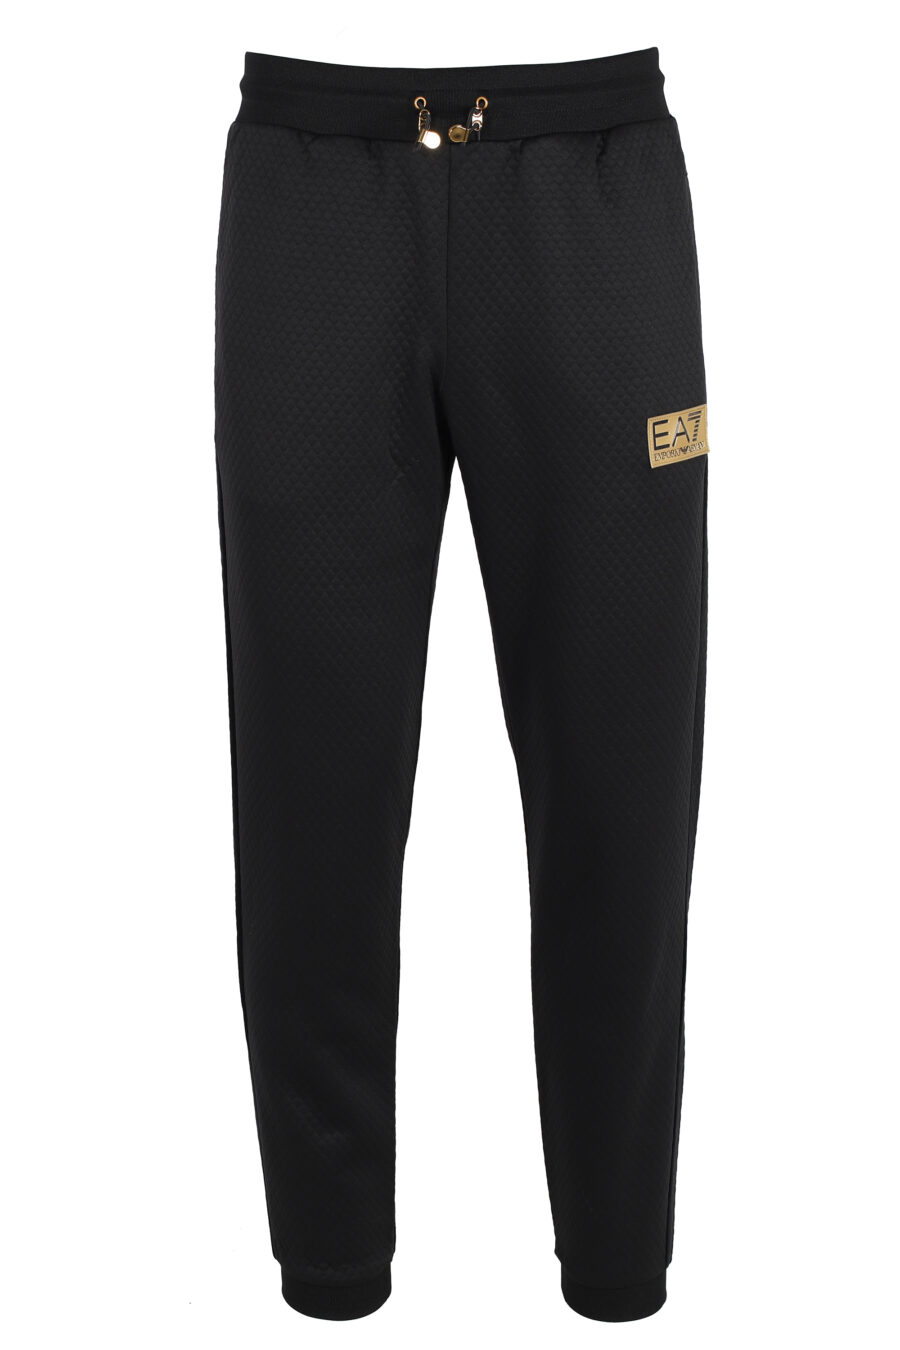 Tracksuit bottoms black with gold plaque logo "lux identity" - IMG 4814